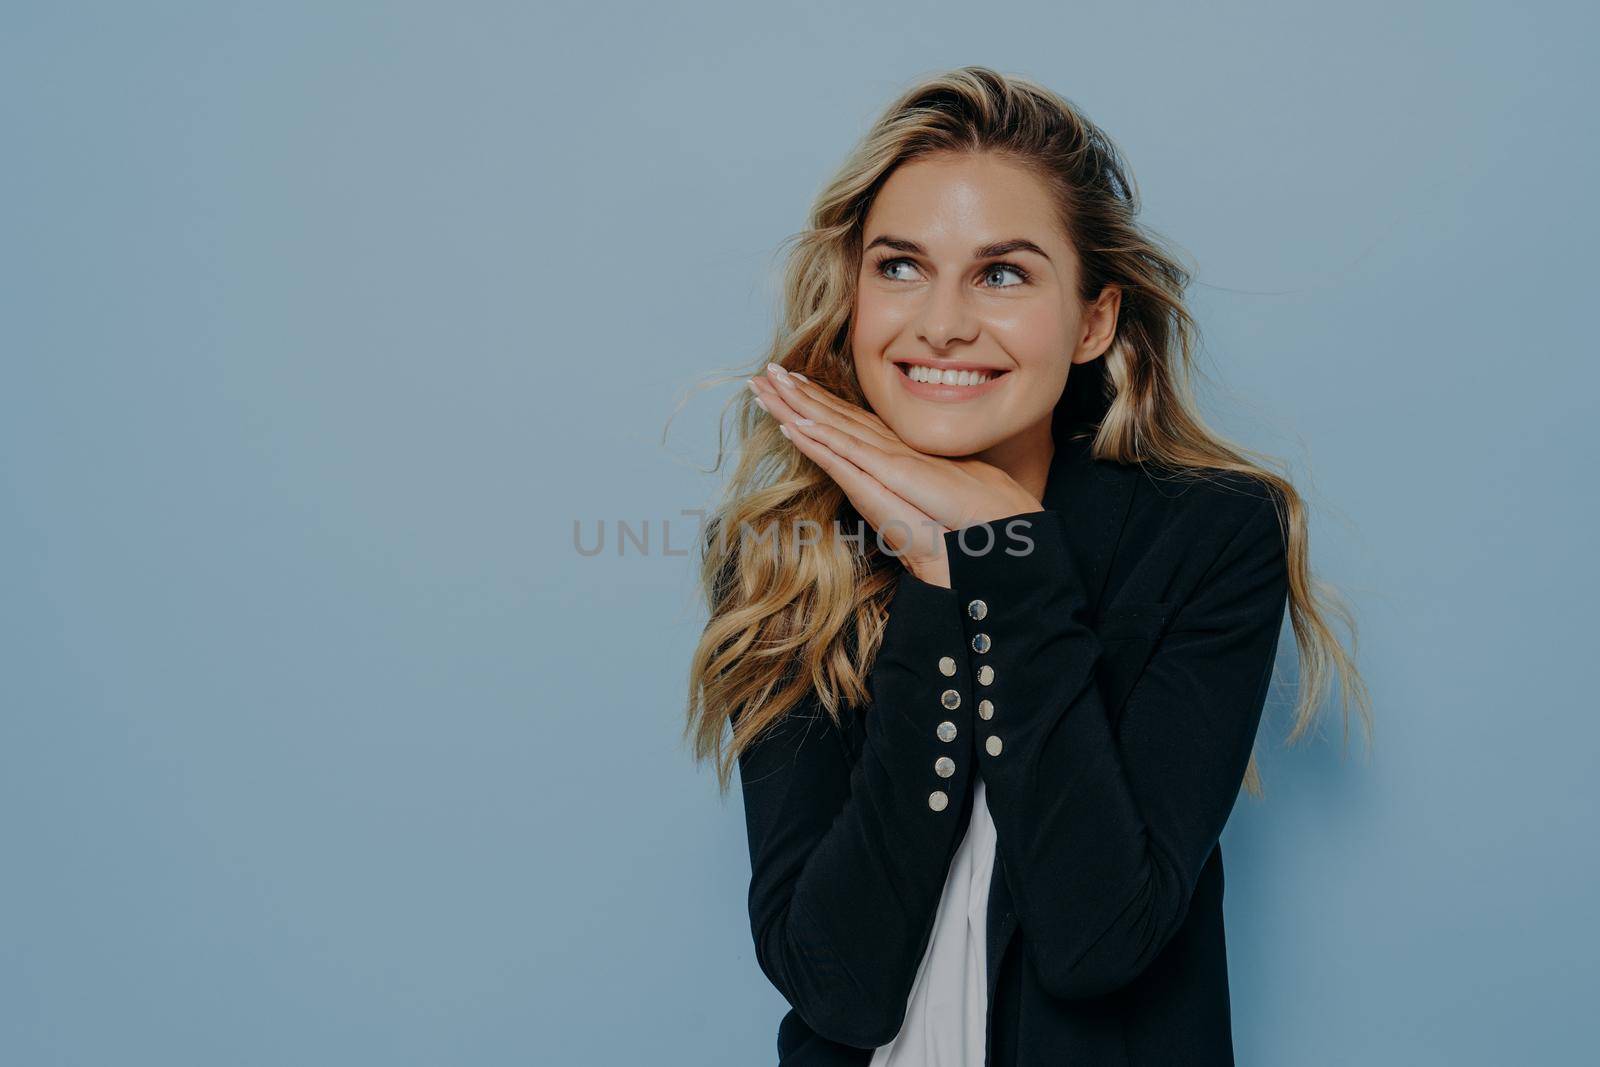 Delightful young european woman with blonde wavy hair wearing black blazer over white tshirt feeling happy of hearing compliment from friends, smiling and looking upside. Positive human emotions